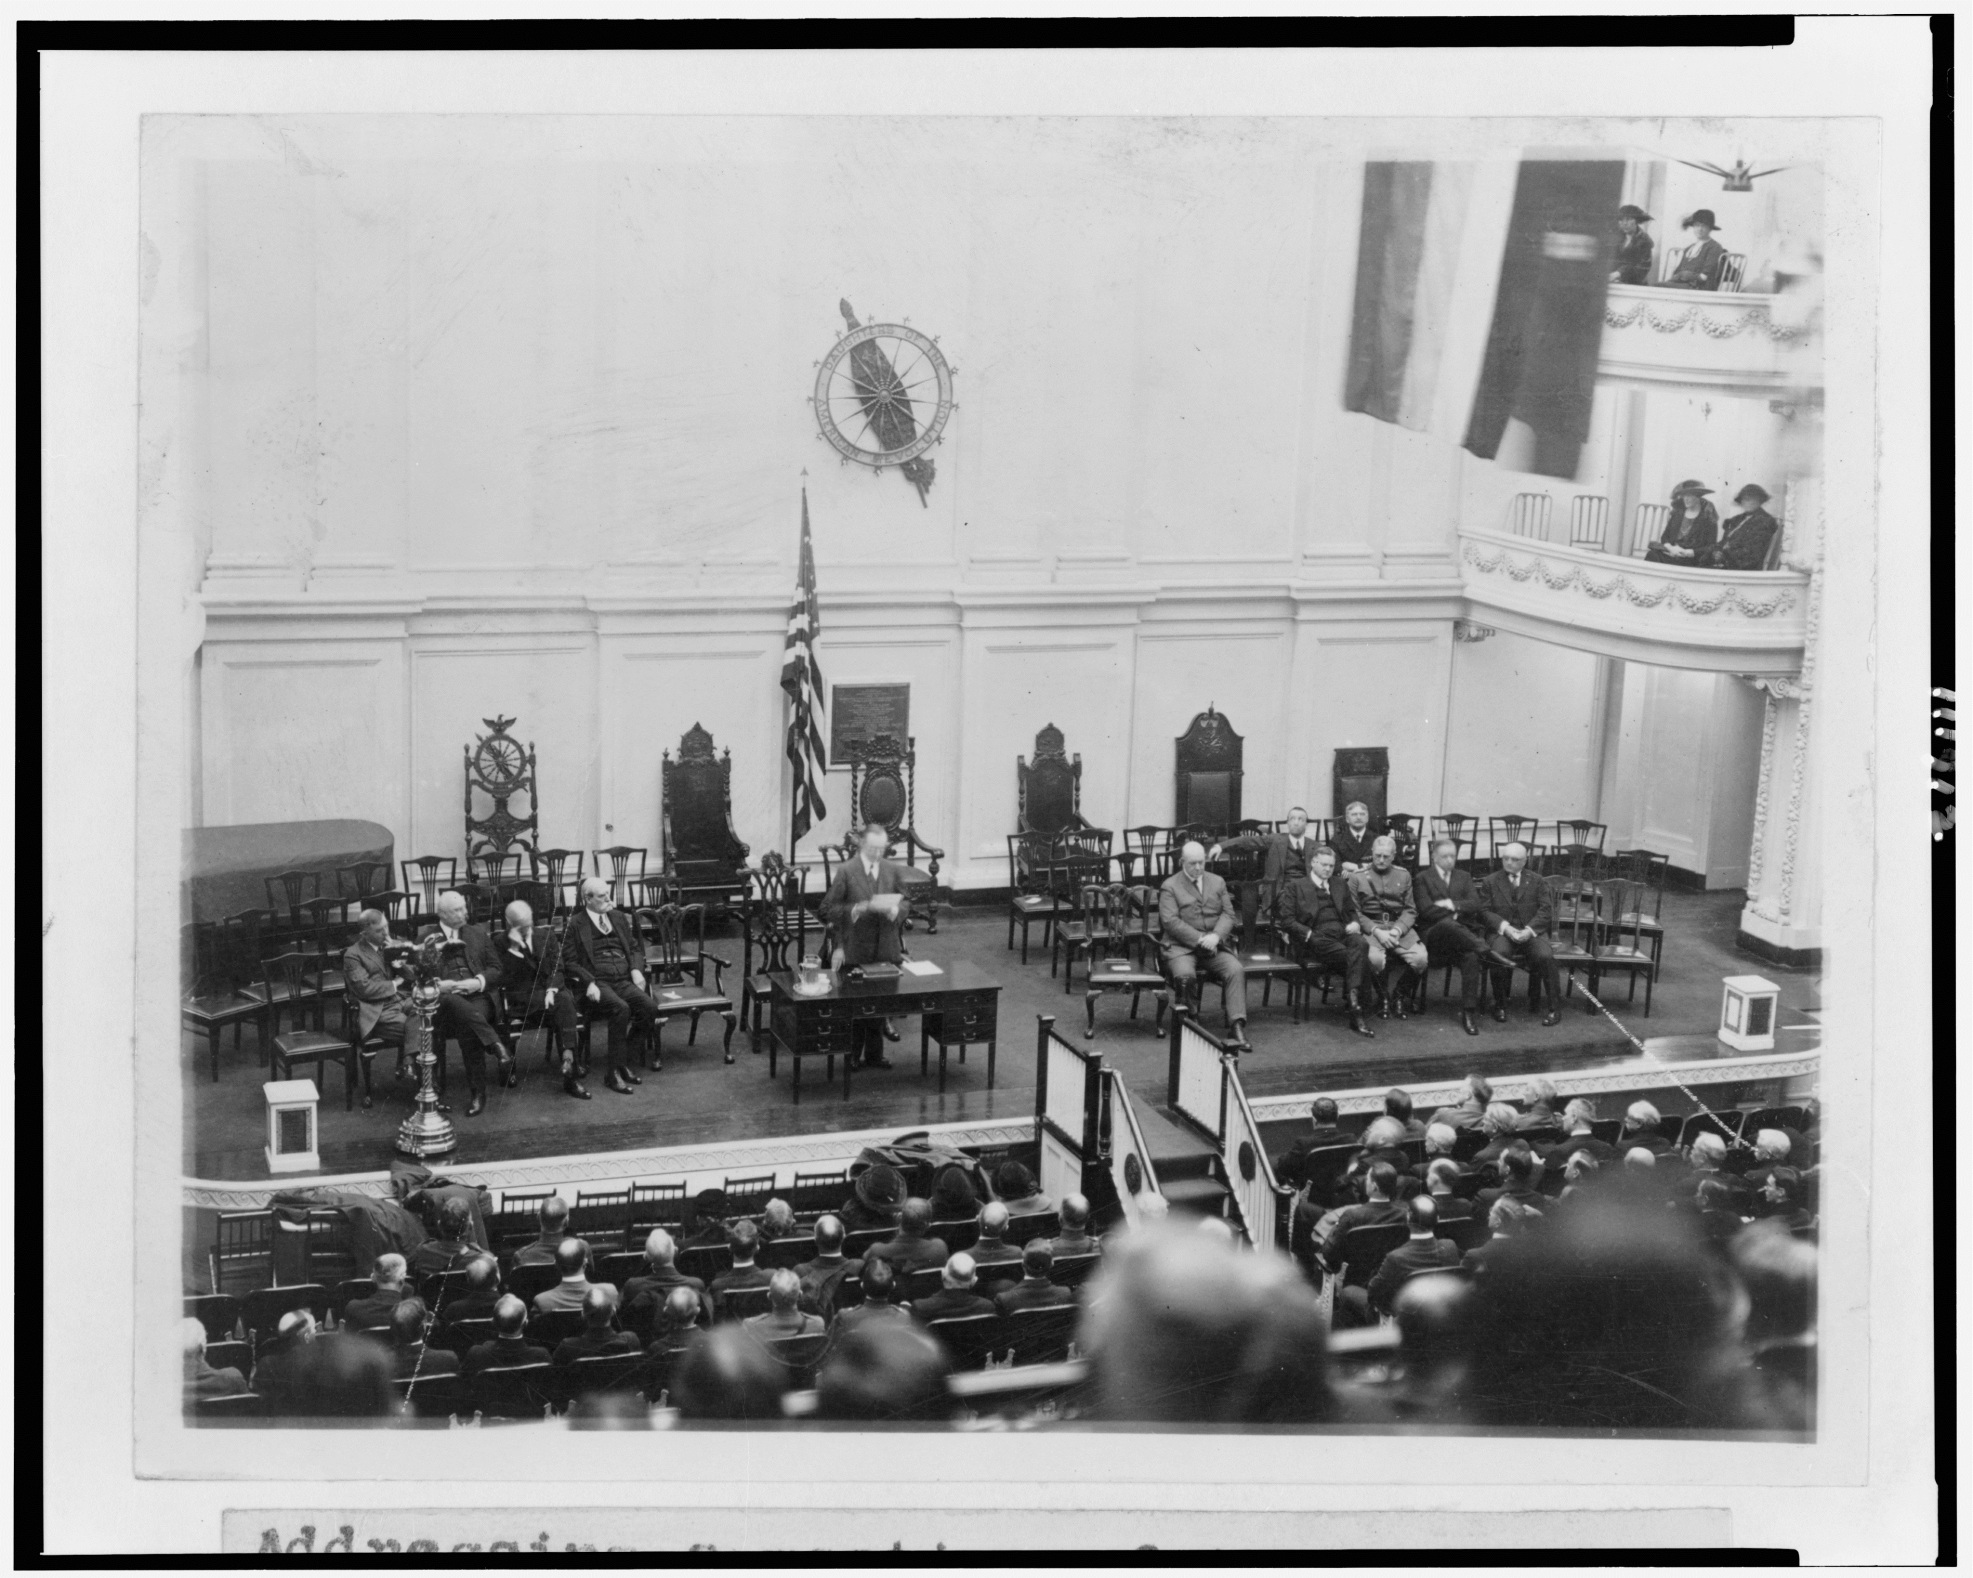 Coolidge speaks at the Budget Meeting in 1923 